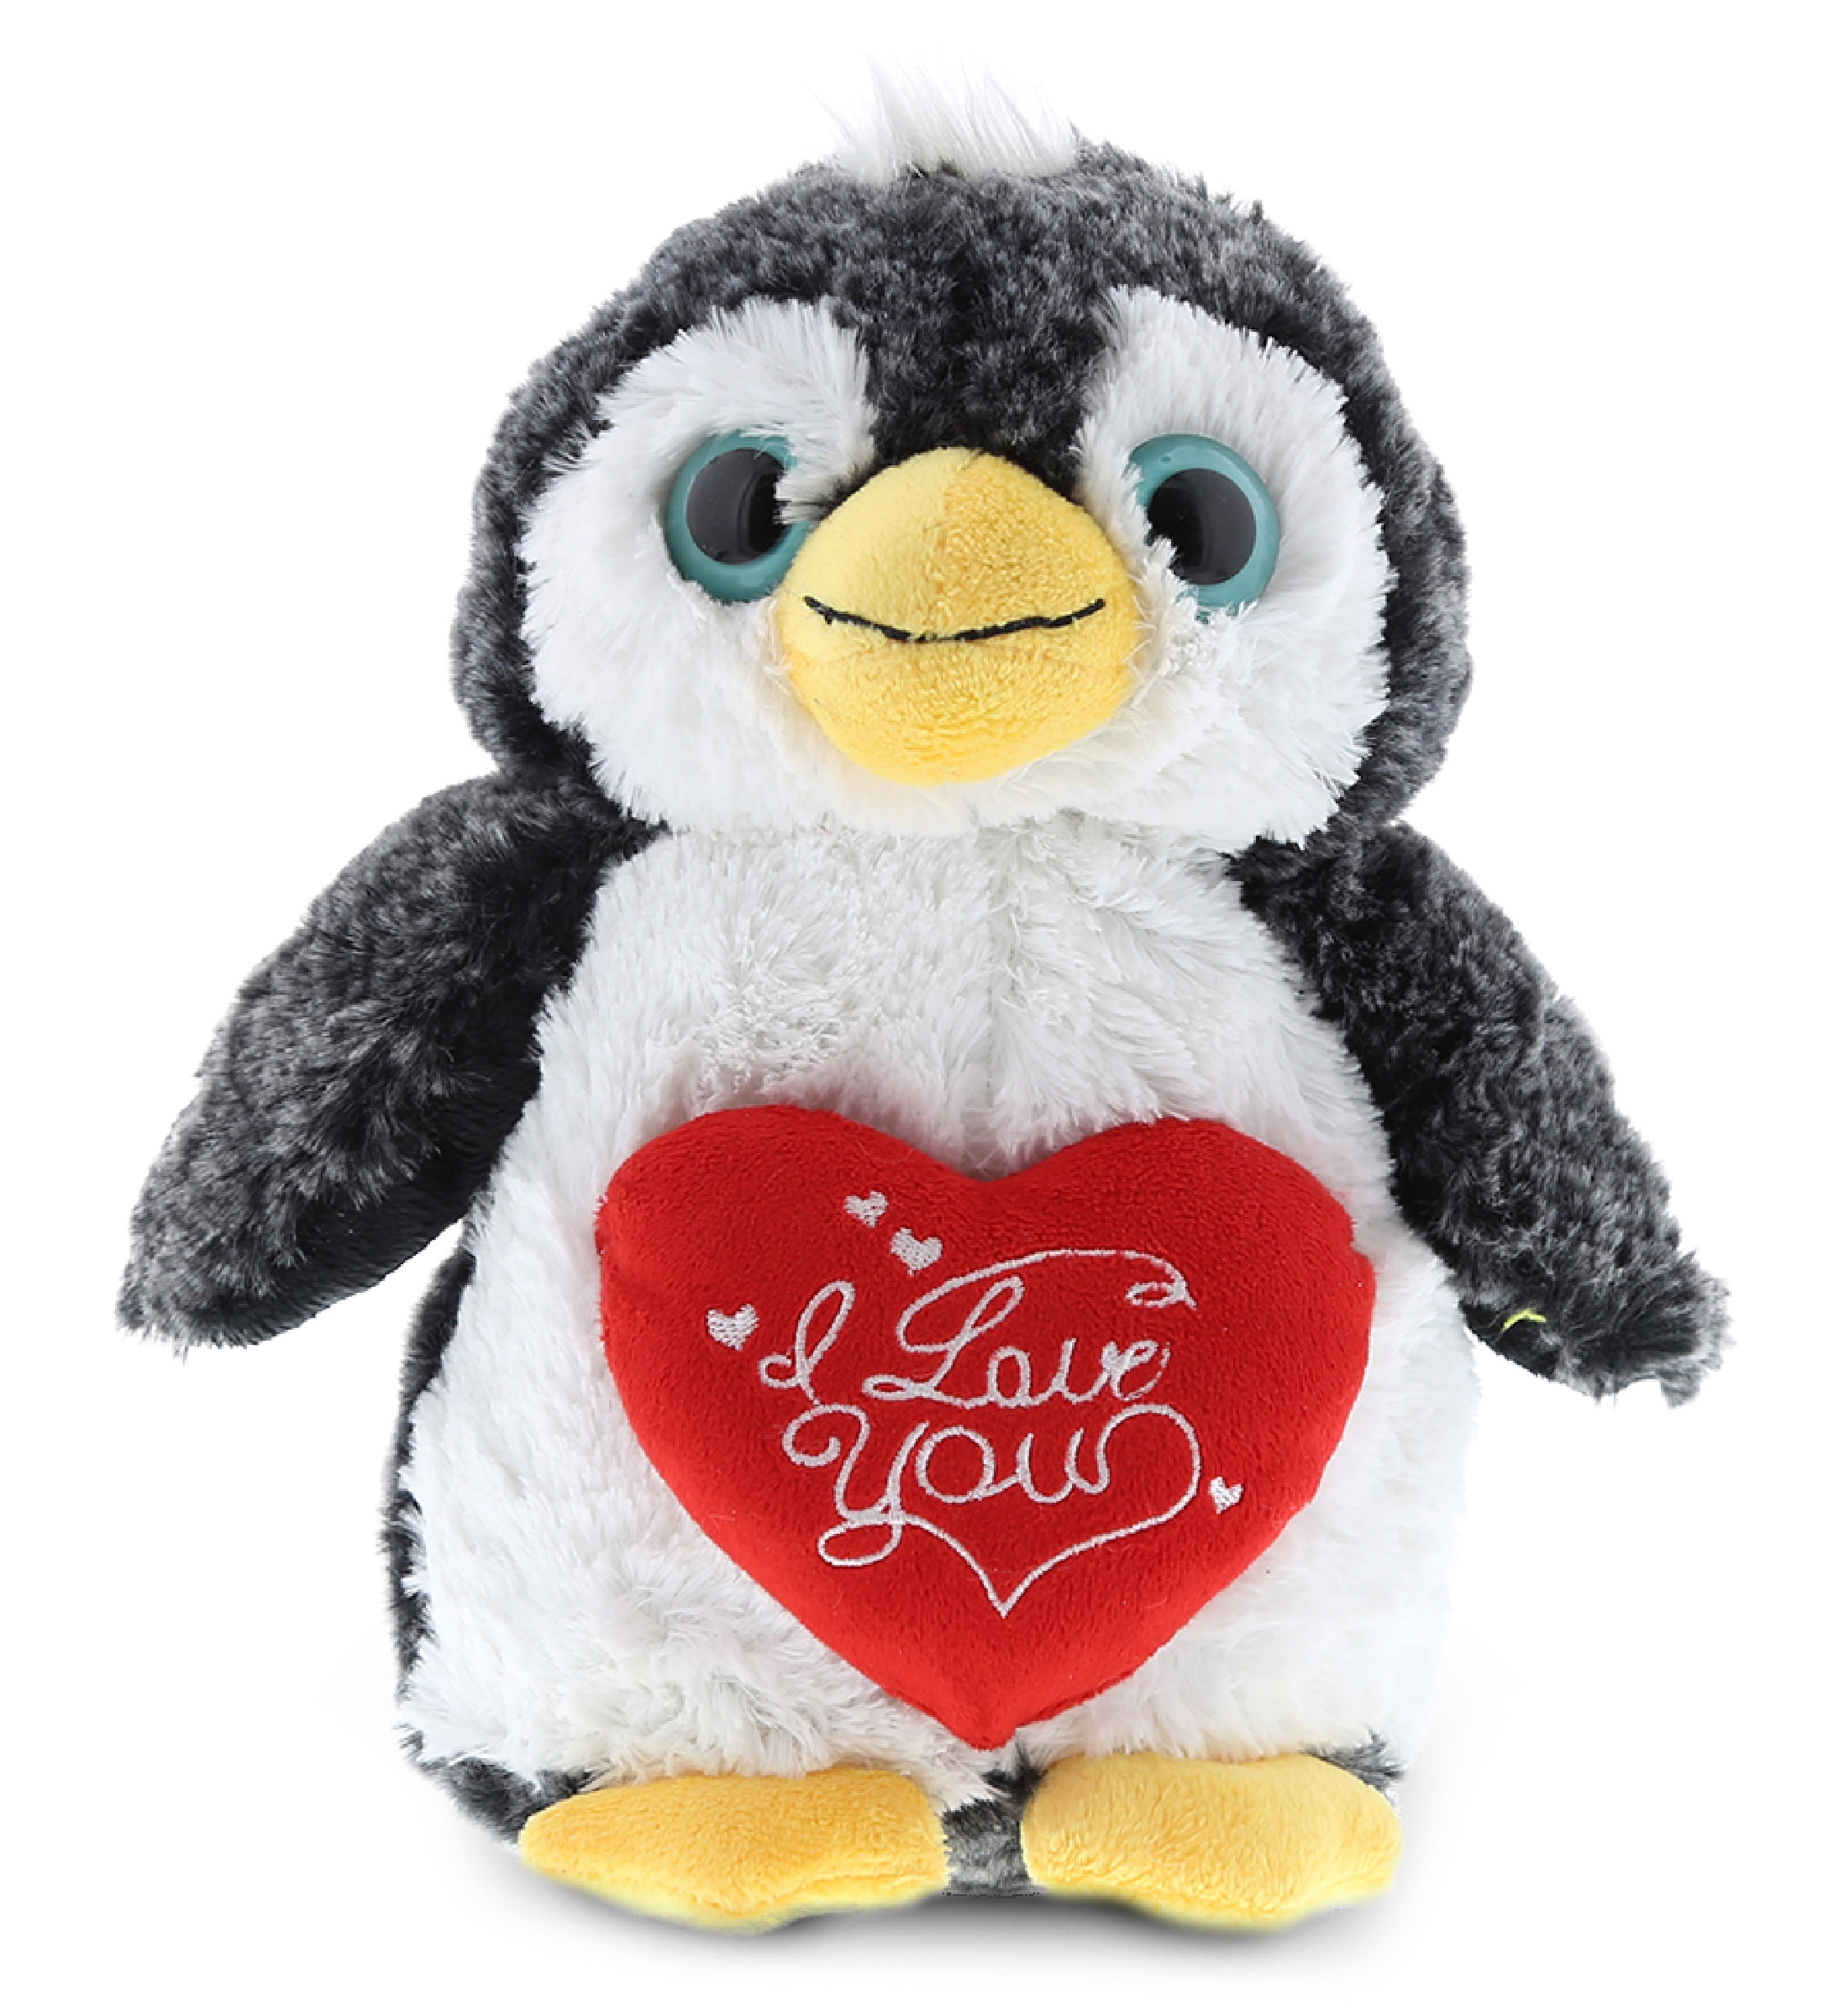 Soft Penguin Stuff Plush Doll Gift for Kids Girls Boys Girlfriend Valentines Day Gifts Throw Pillow Plushies Penguin Stuffed Animal Toys Blue,9.8in/25cm 